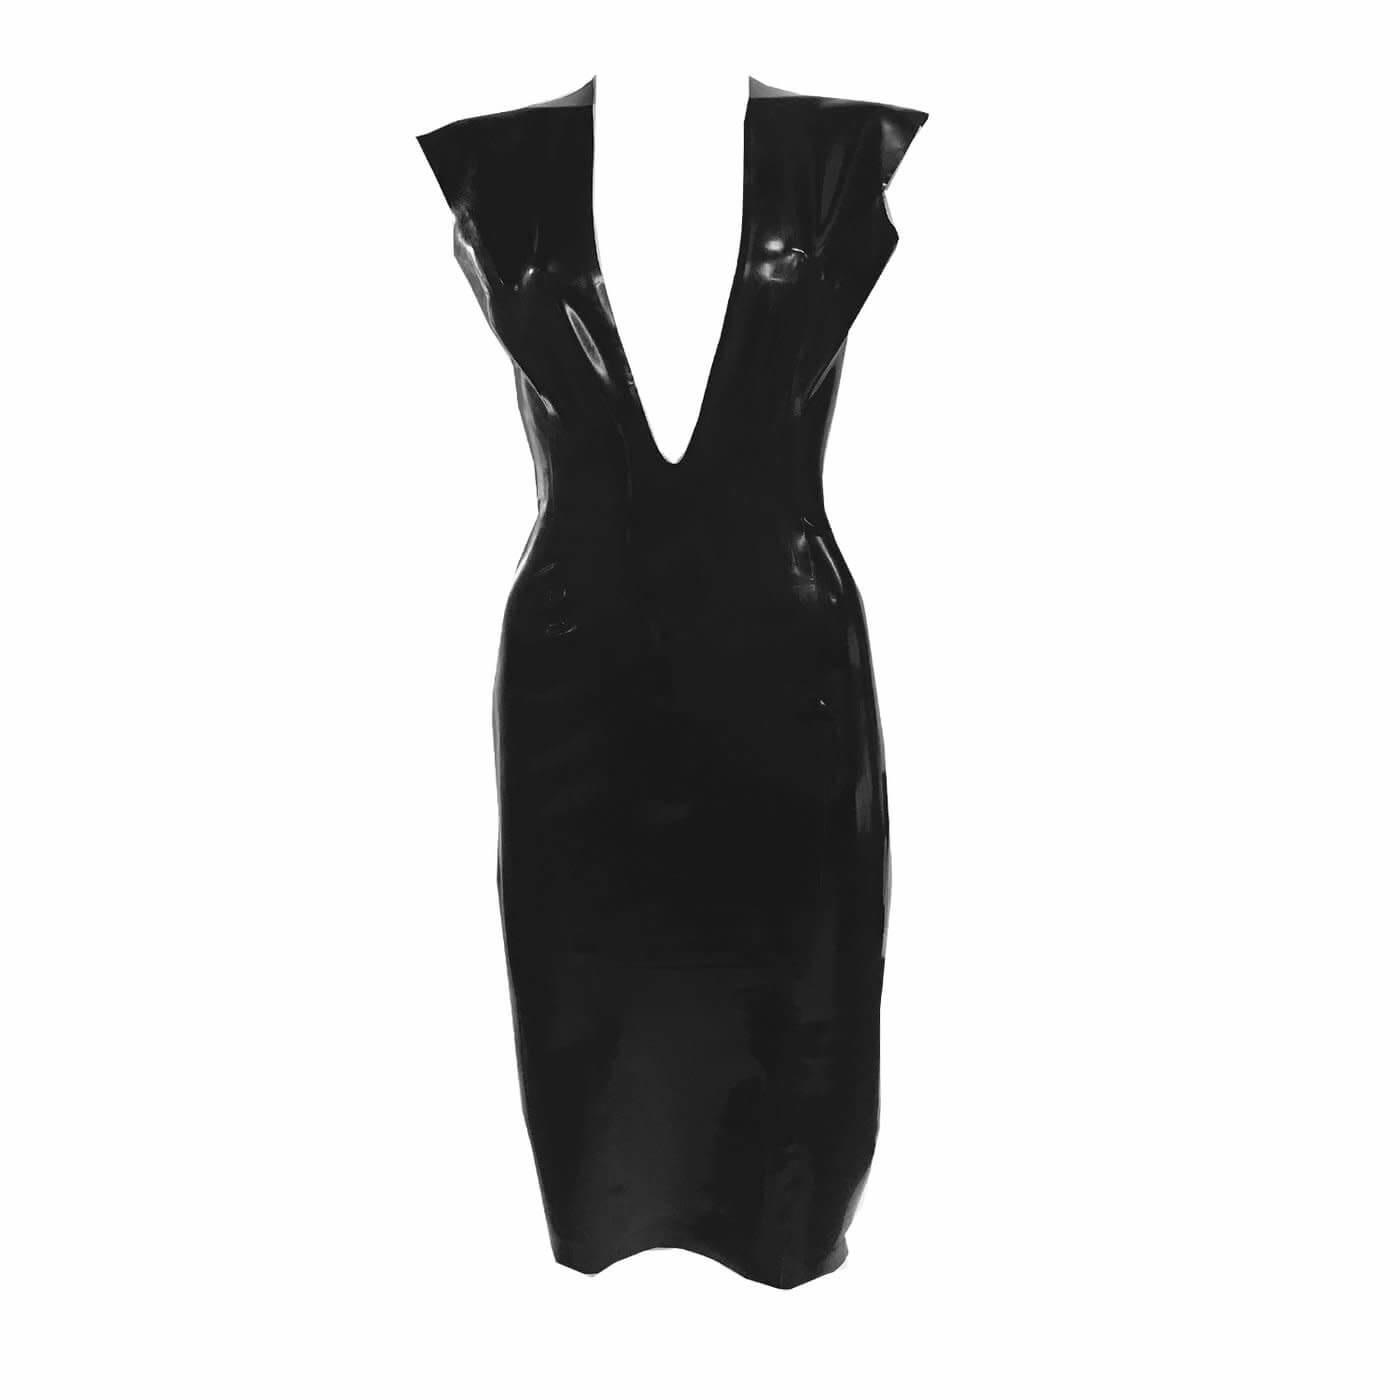 a black latex dress with a deep v-neck. short sleeves that do not reach far past the shoulder. The dress is about mid-calf in length. 